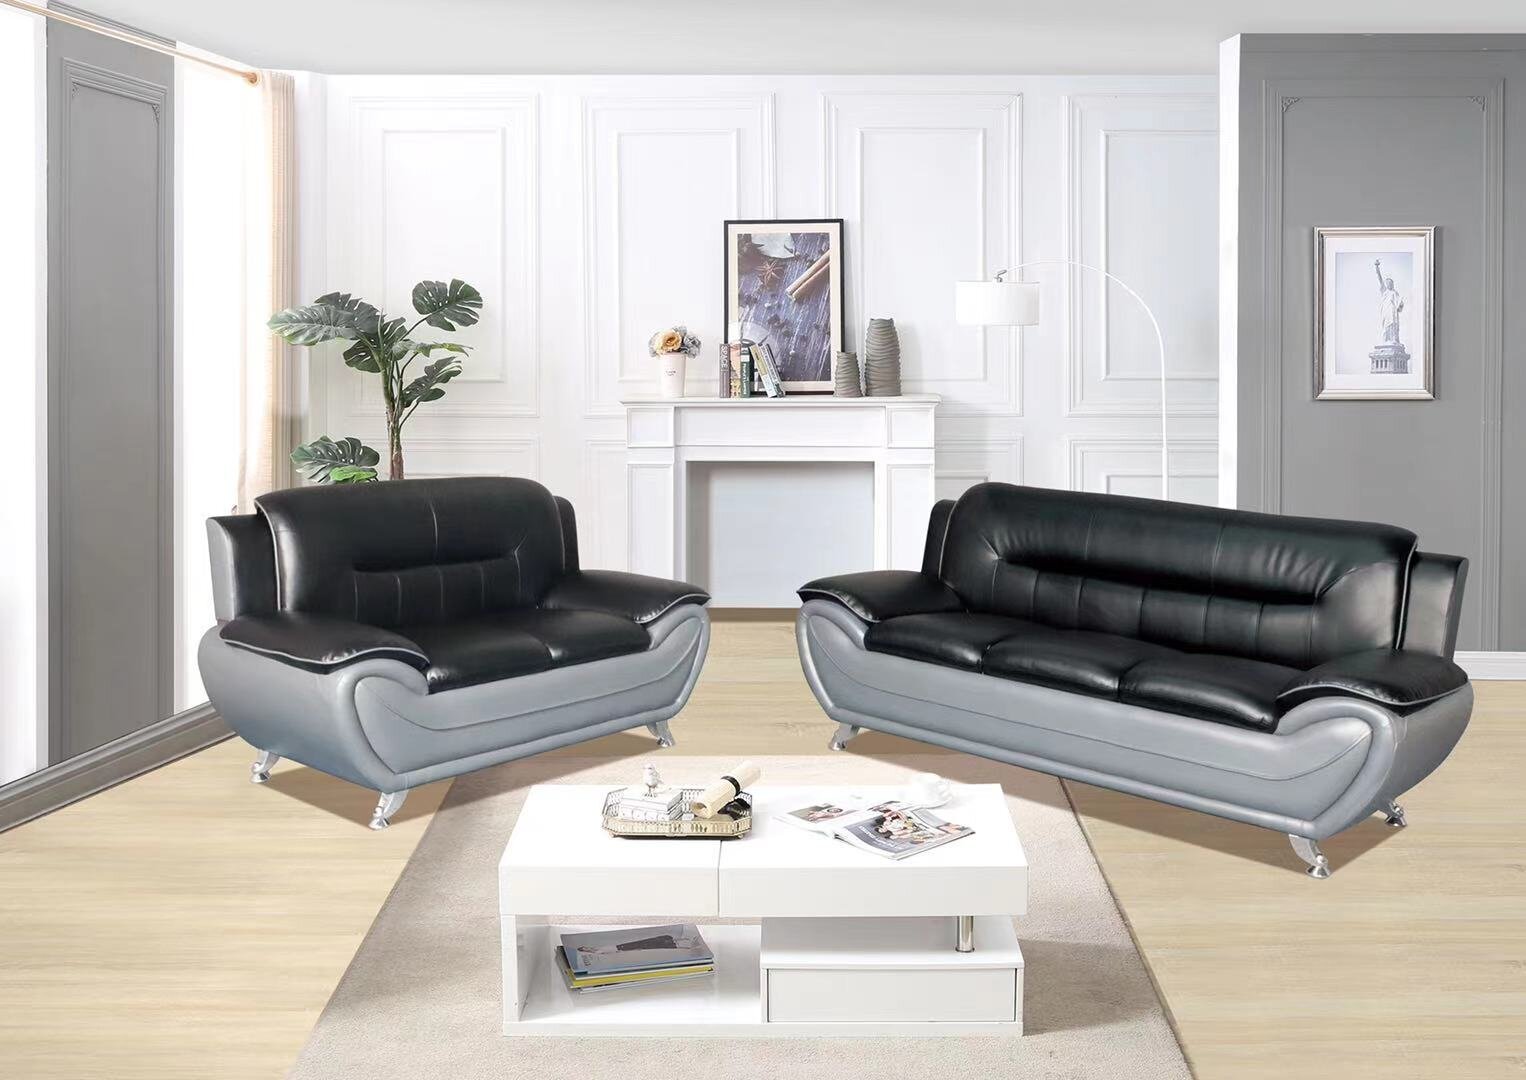 Ivy Bronx Modern 20 Piece Living Room Sofa Set Leather Couch ...